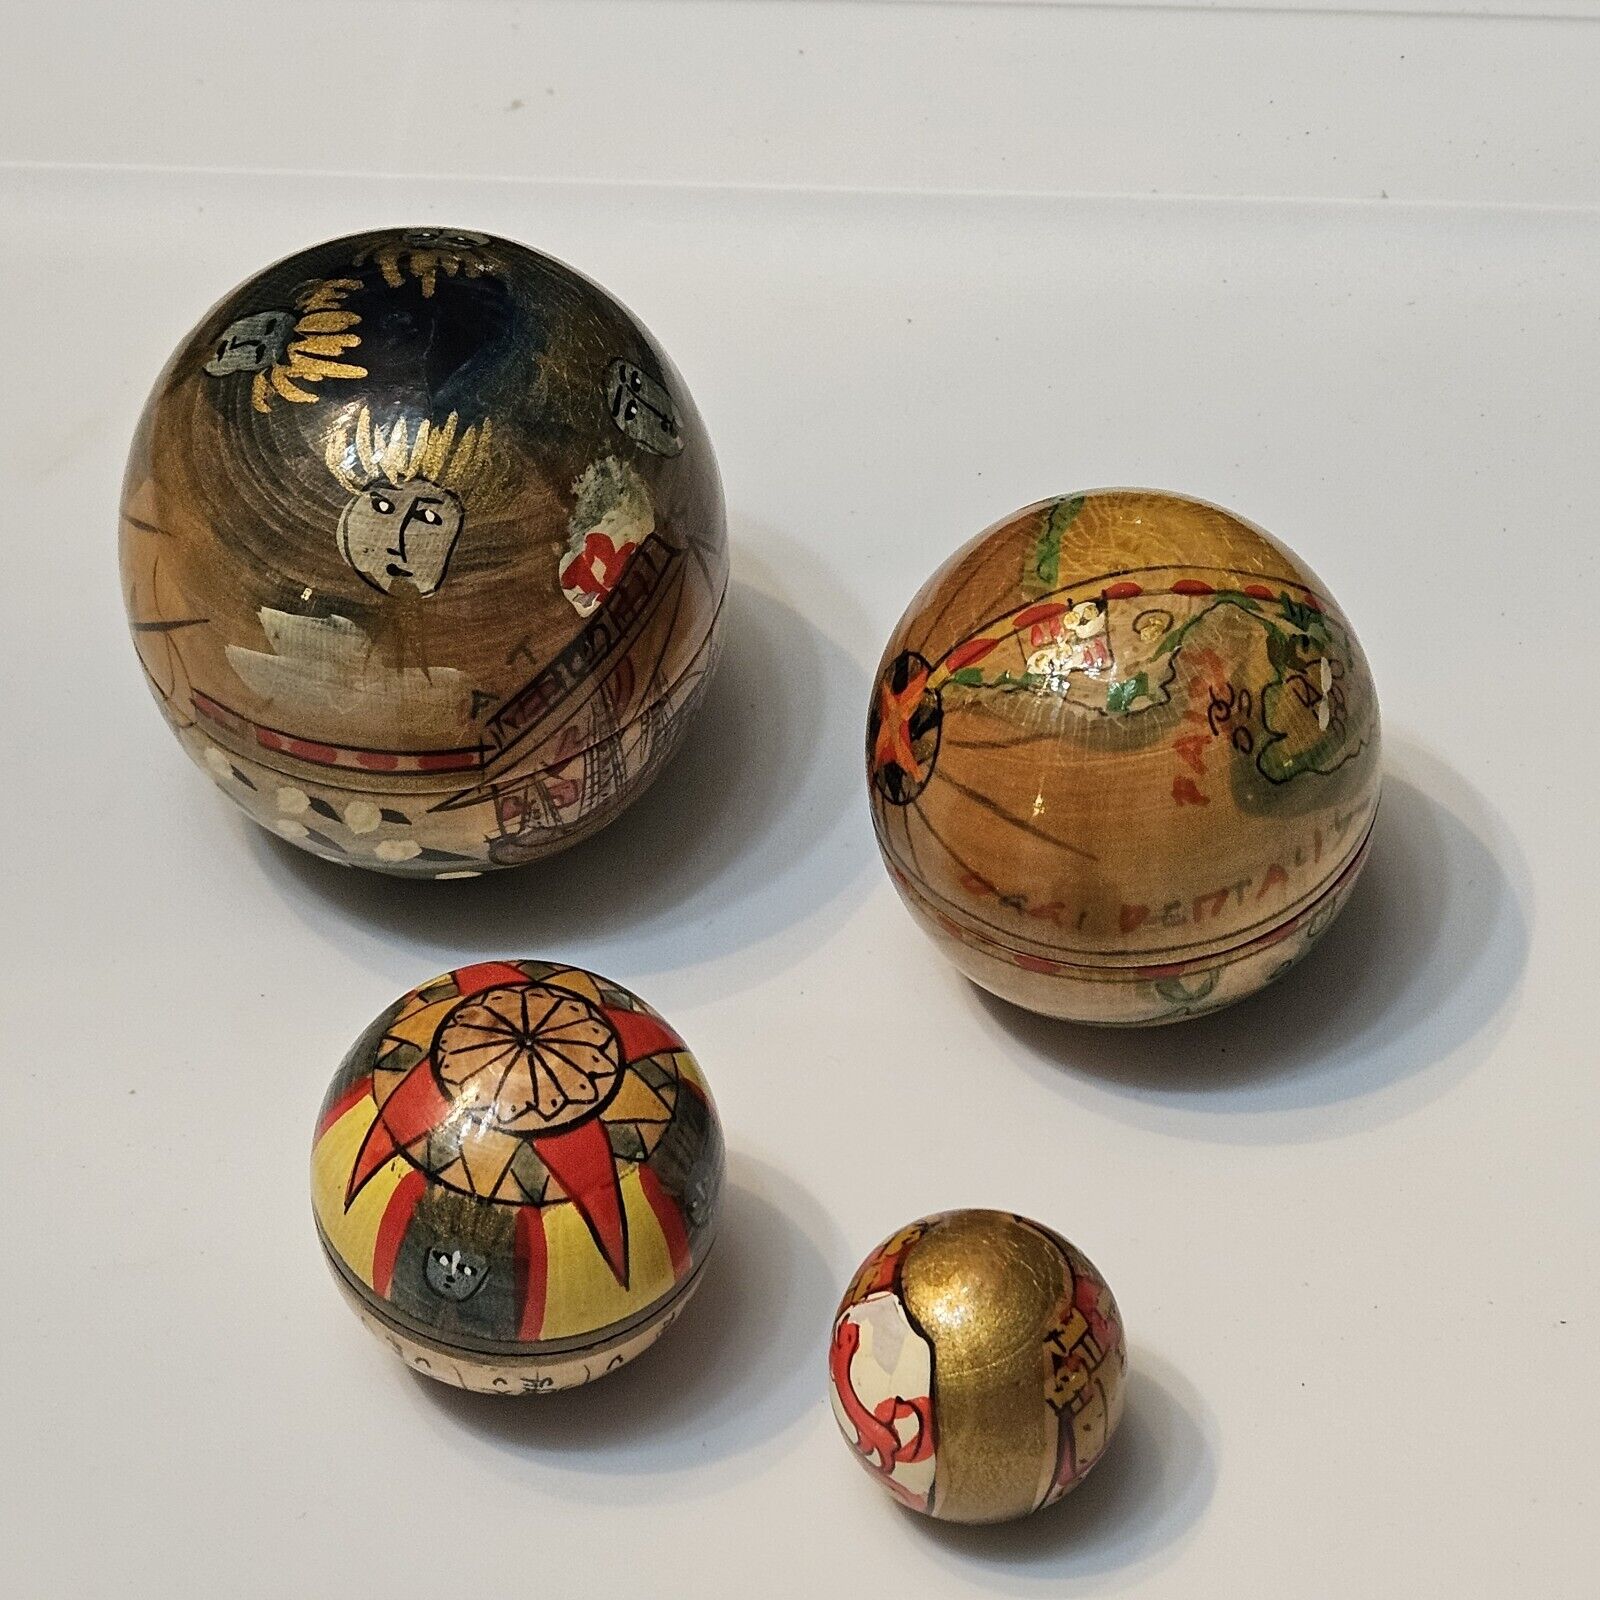 Vintage Wood Lacquered Painted Nesting Balls Nautical Map Globes Authentic Model